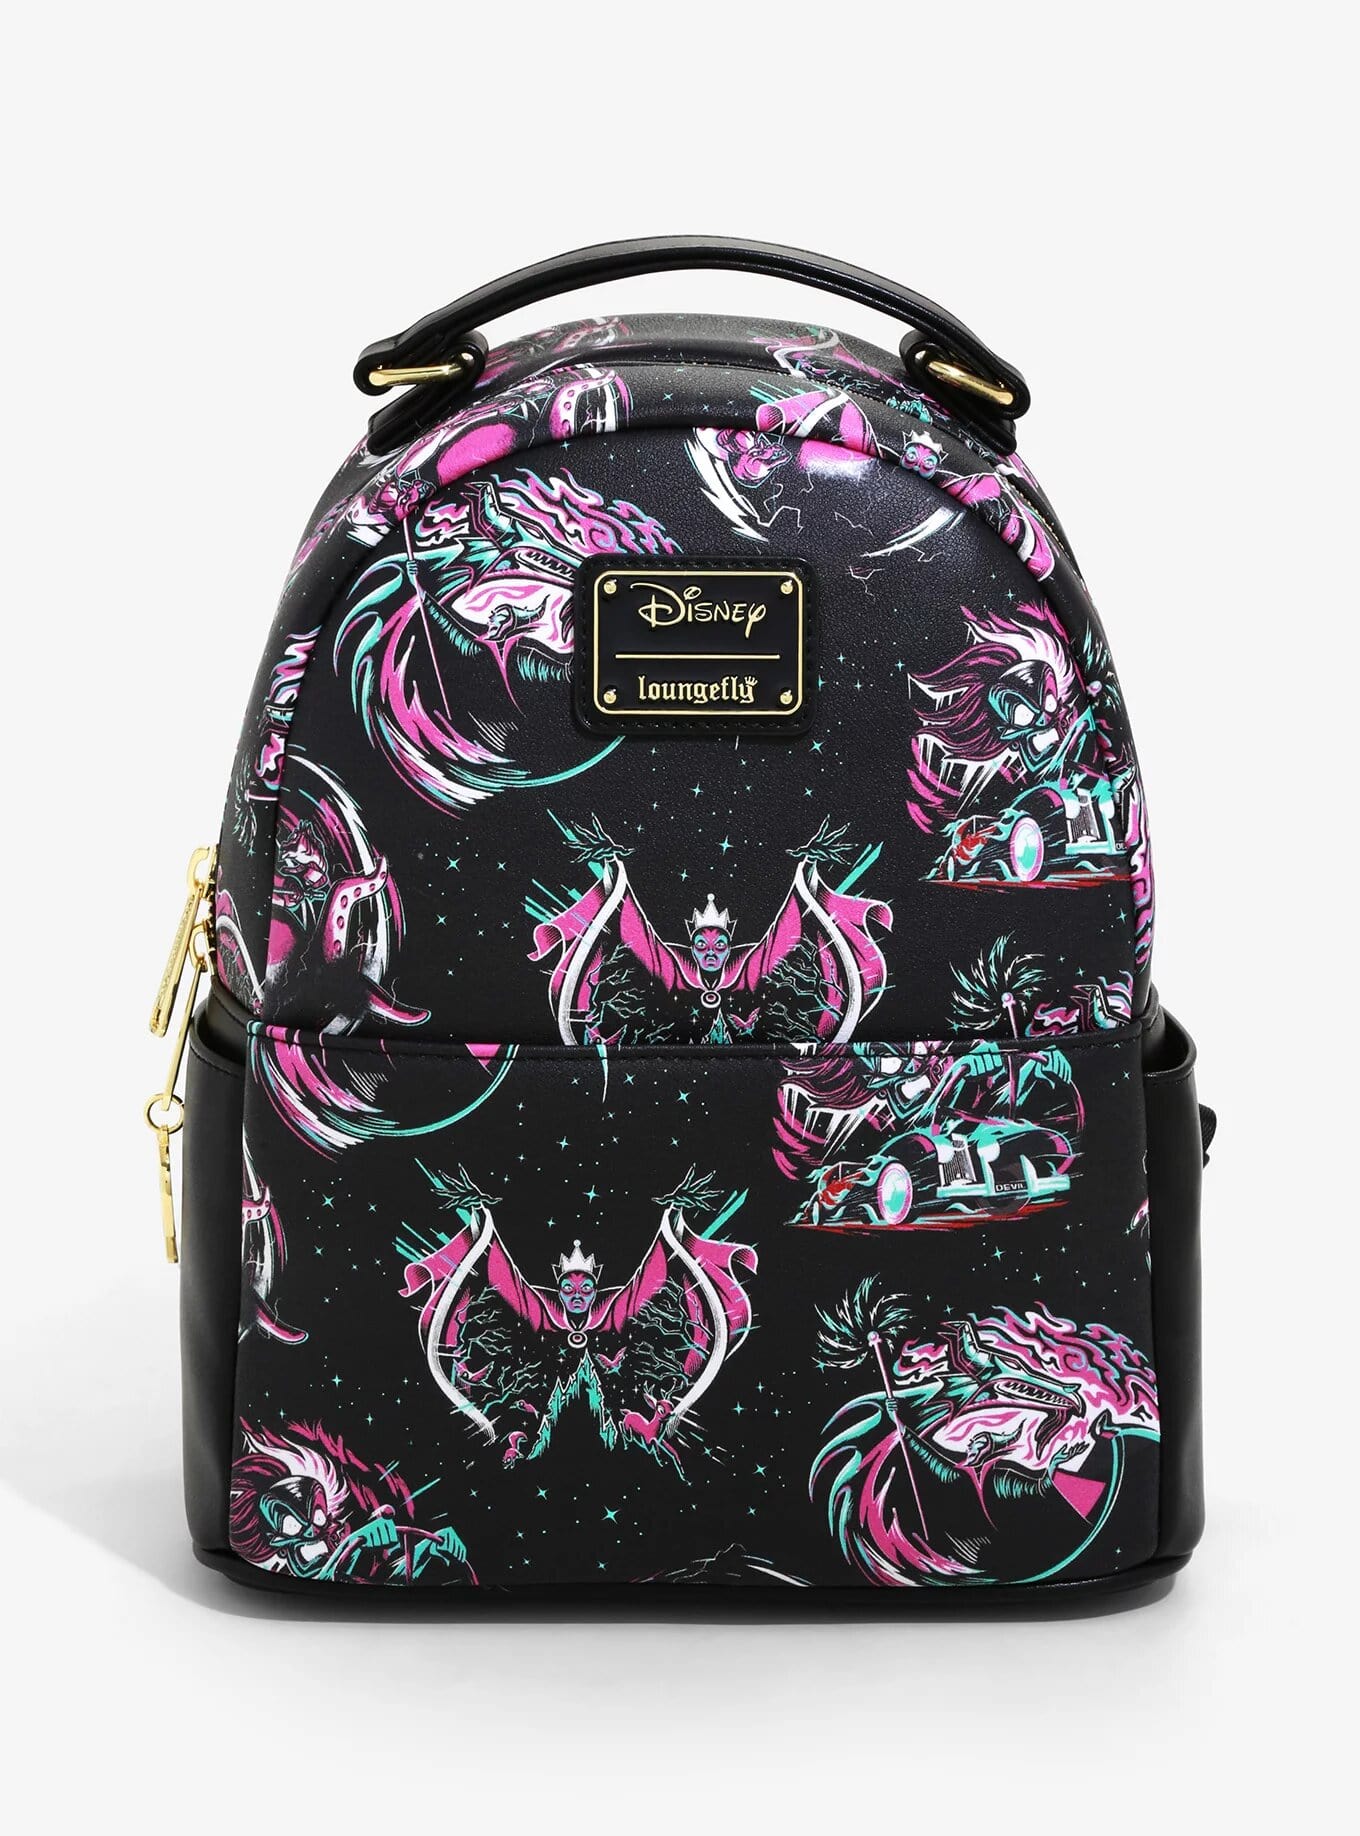 Get Grungy With This New Disney Villains Loungefly